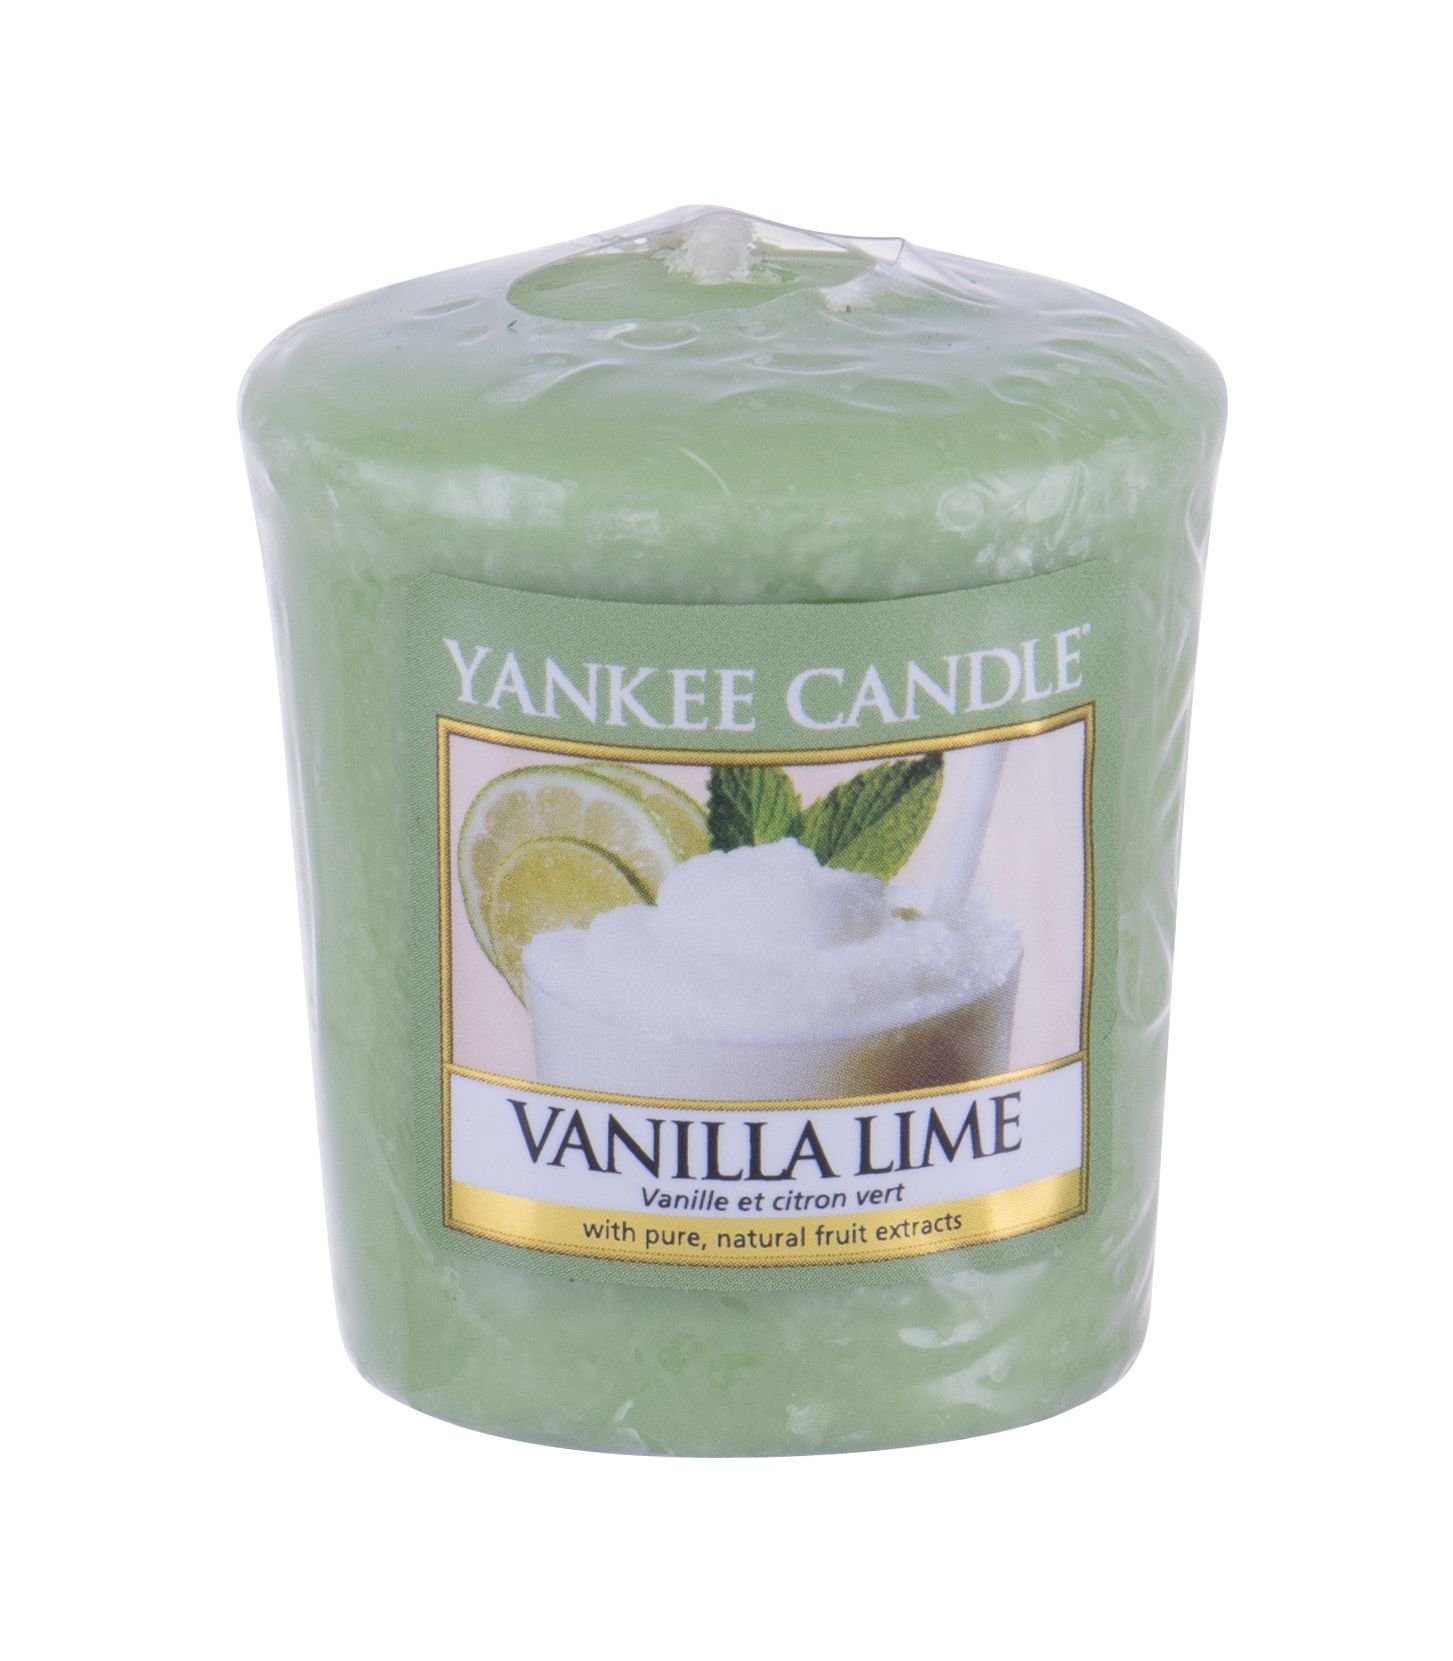 Yankee Candle Vanilla Lime 49g Kvepalai Unisex Scented Candle